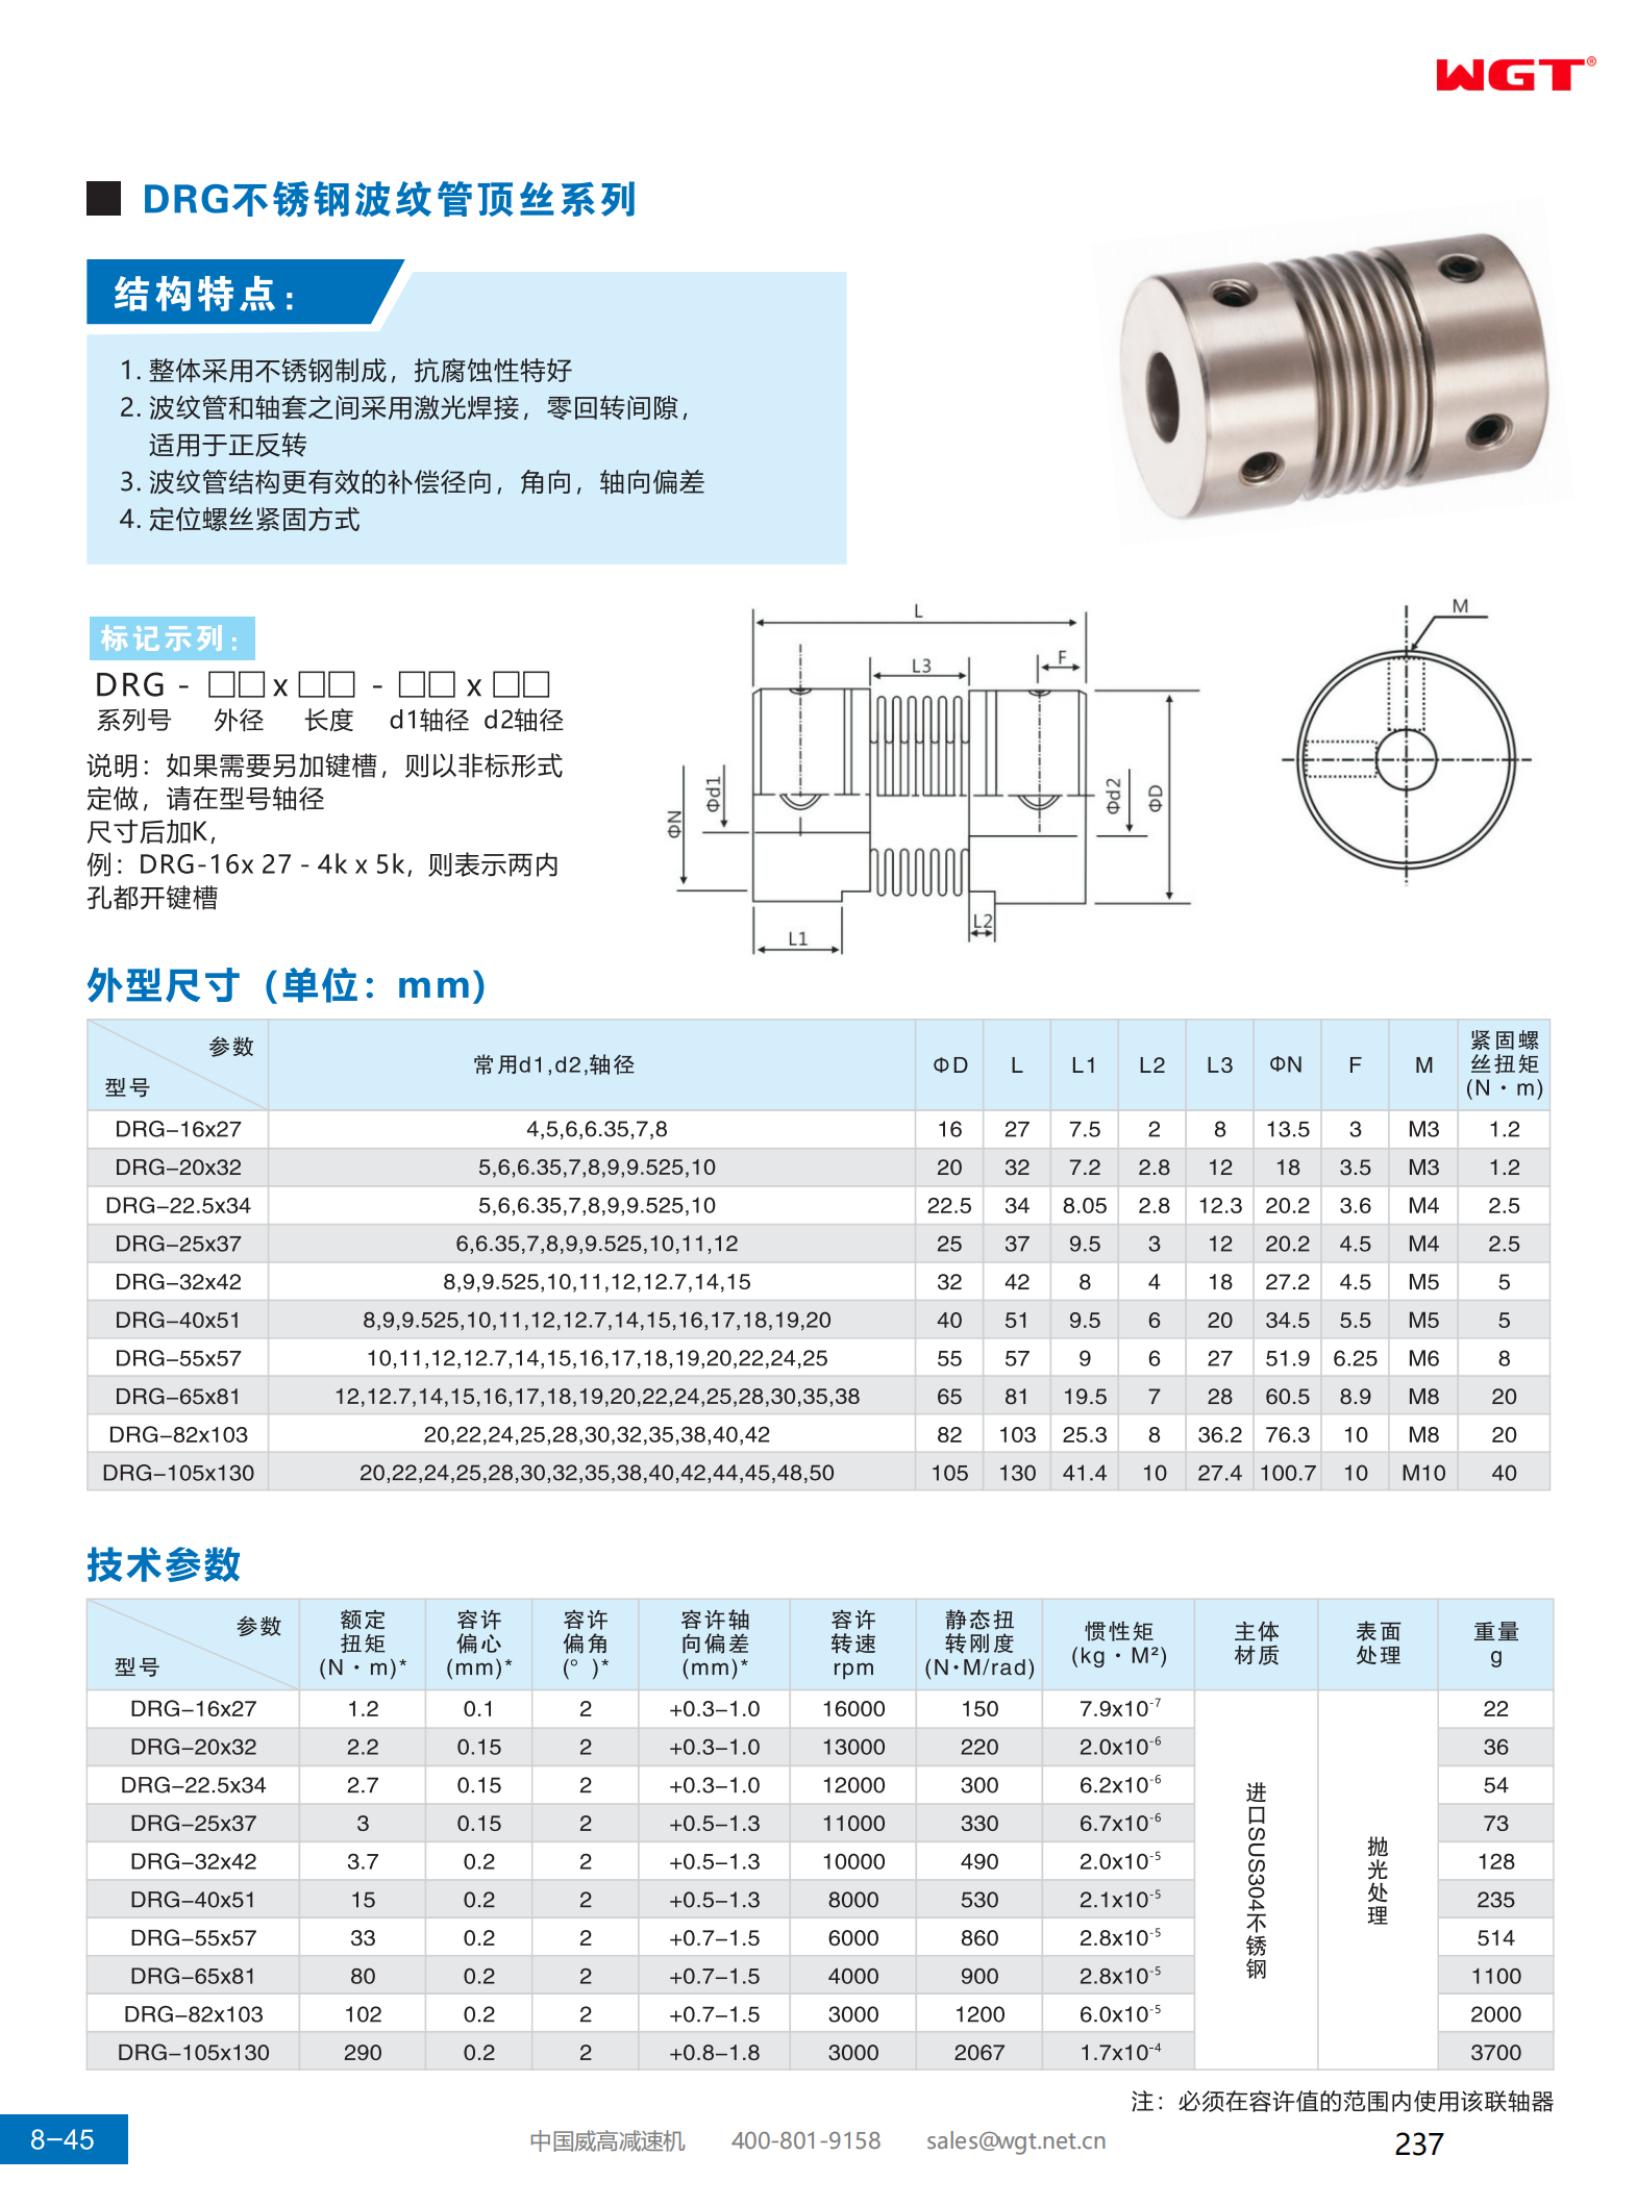 DRG stainless steel bellows top wire series